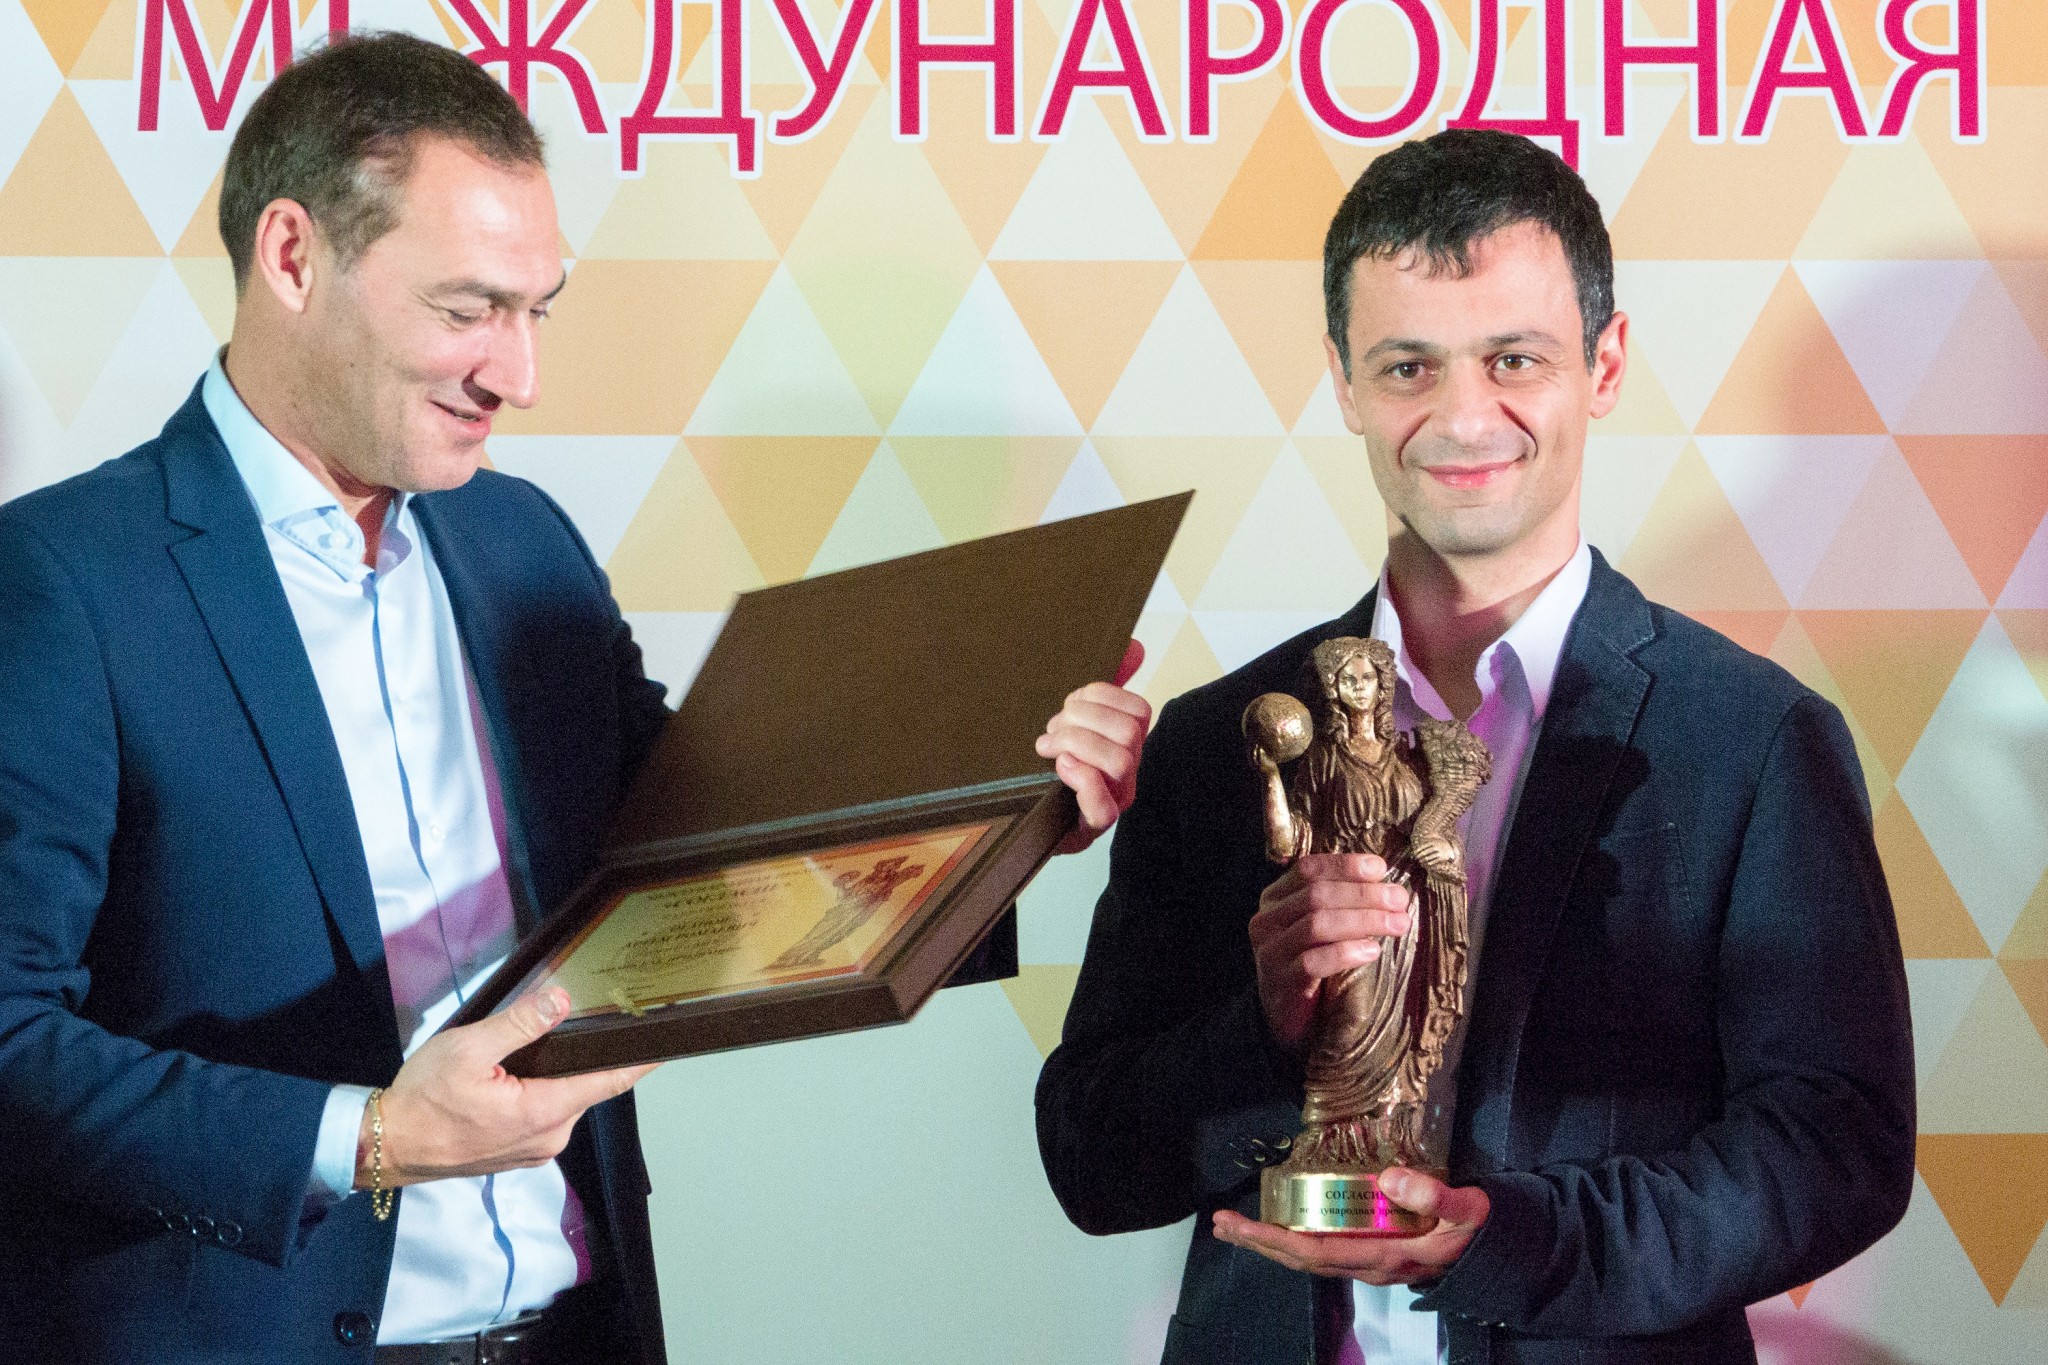 Oganov becoming the youngest person to receive the Concord prize, awarded by the Union of Russian Armenians in collaboration with the Government of Russia and the Russian Presidential Council for Interethnic Relations. Photo: Skoltech.